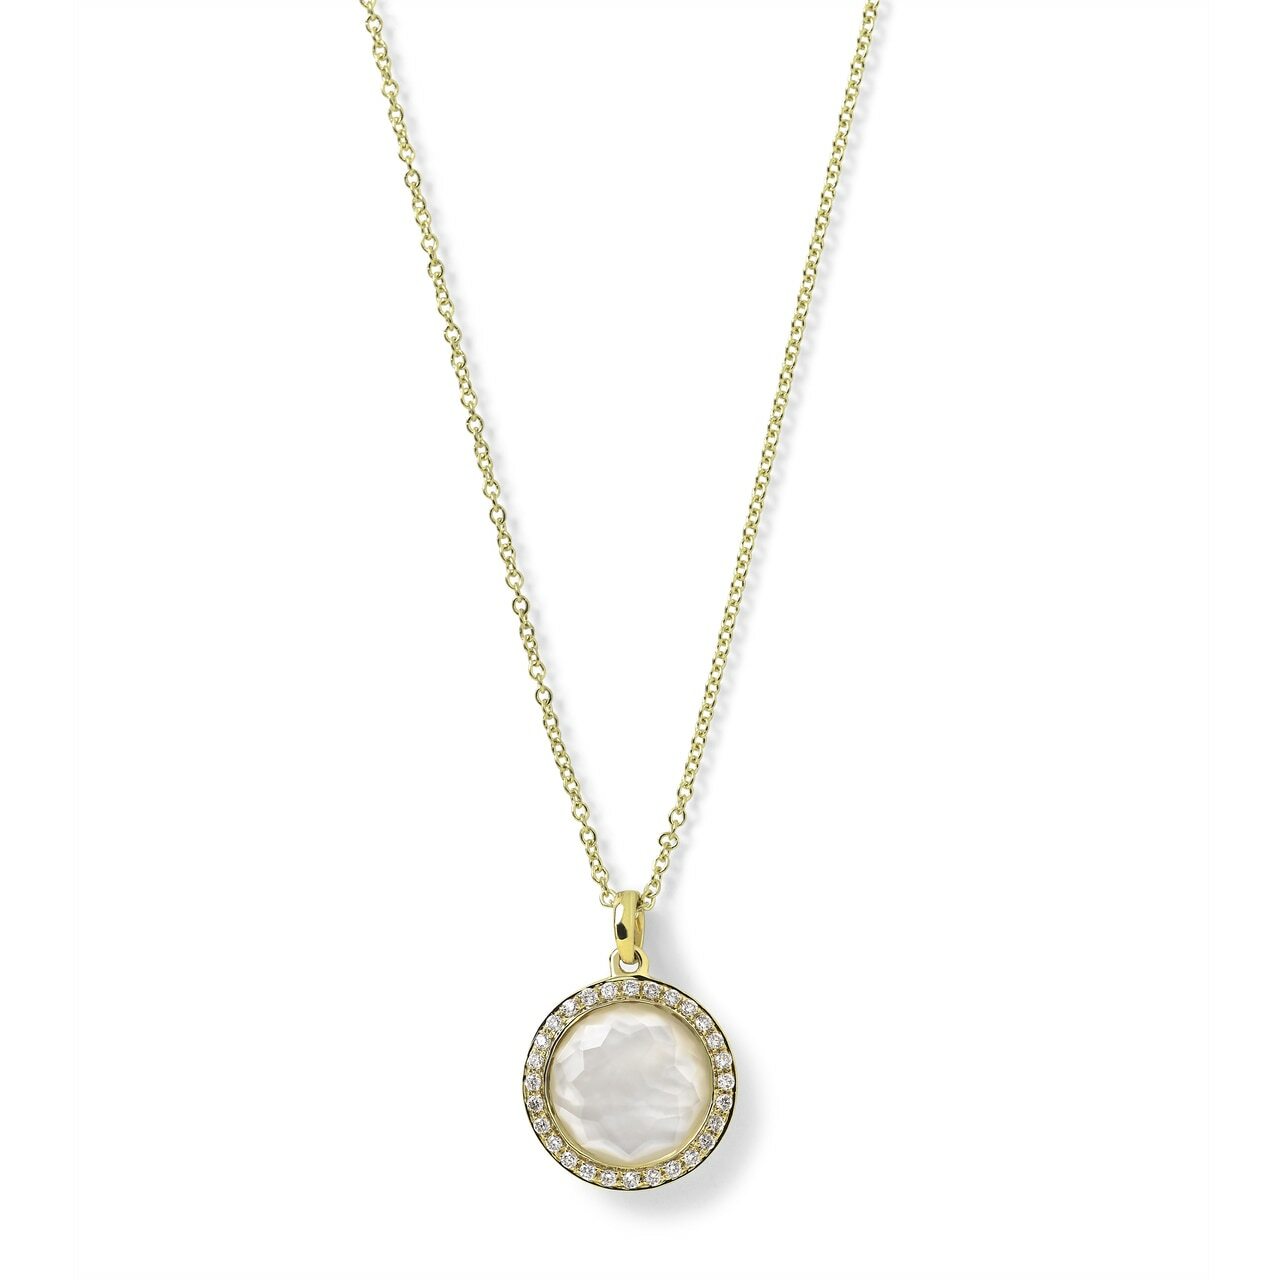 Small Pendant Necklace in 18K Gold with Diamonds